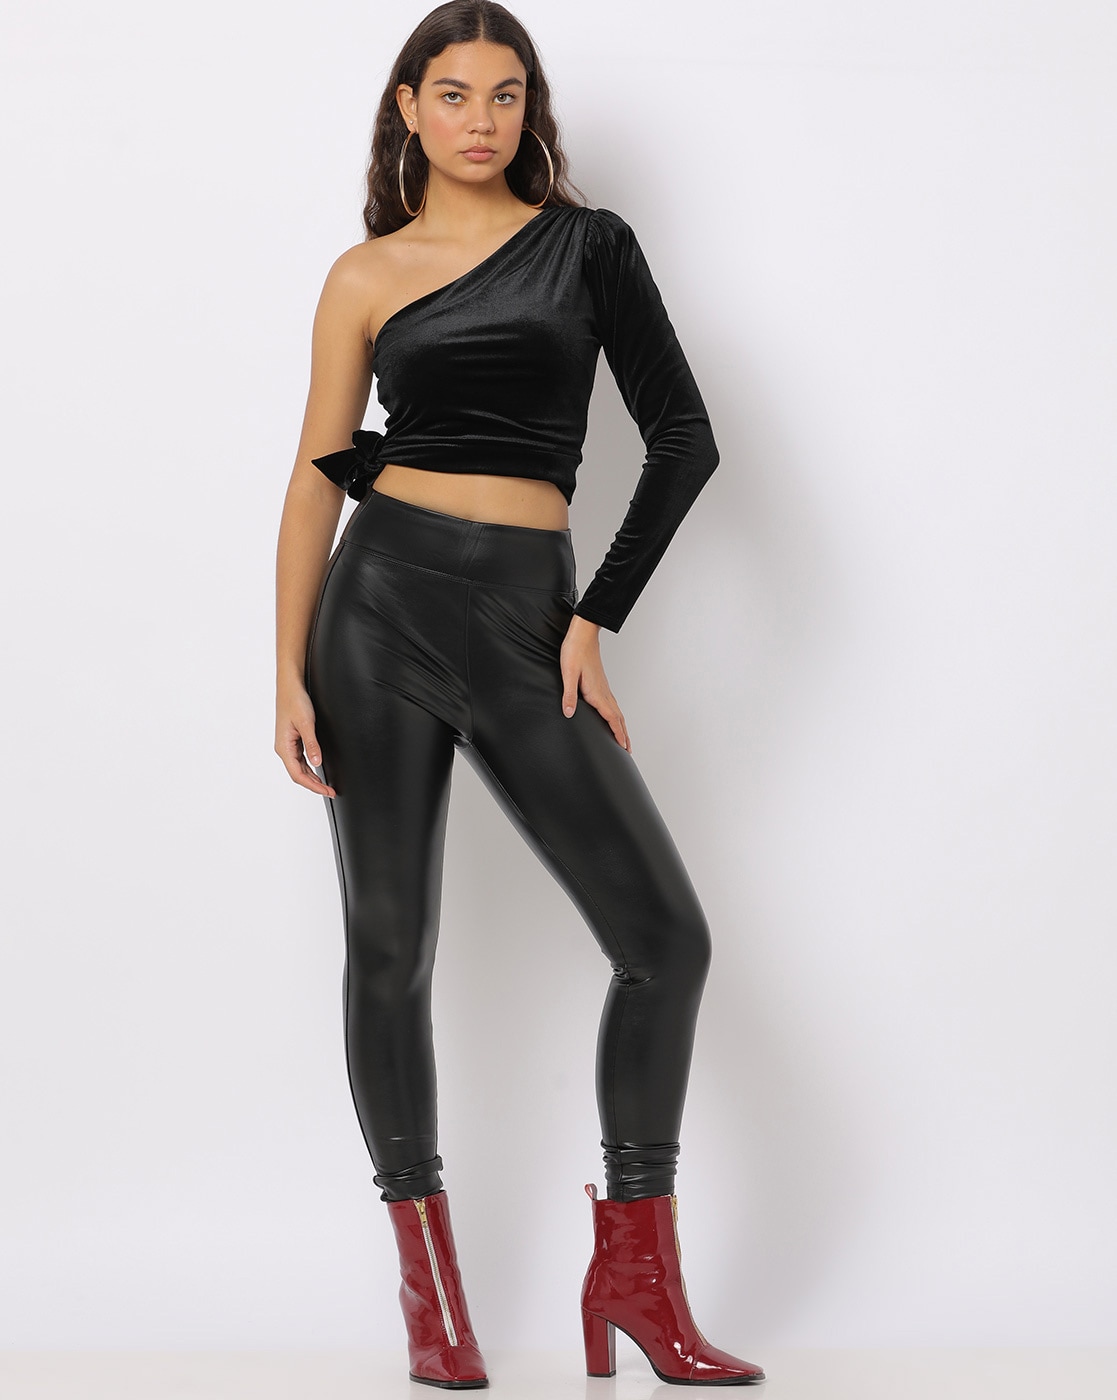 Shop High-Rise Faux Patent Leather Pants for Women from latest collection  at Forever 21 | 323544